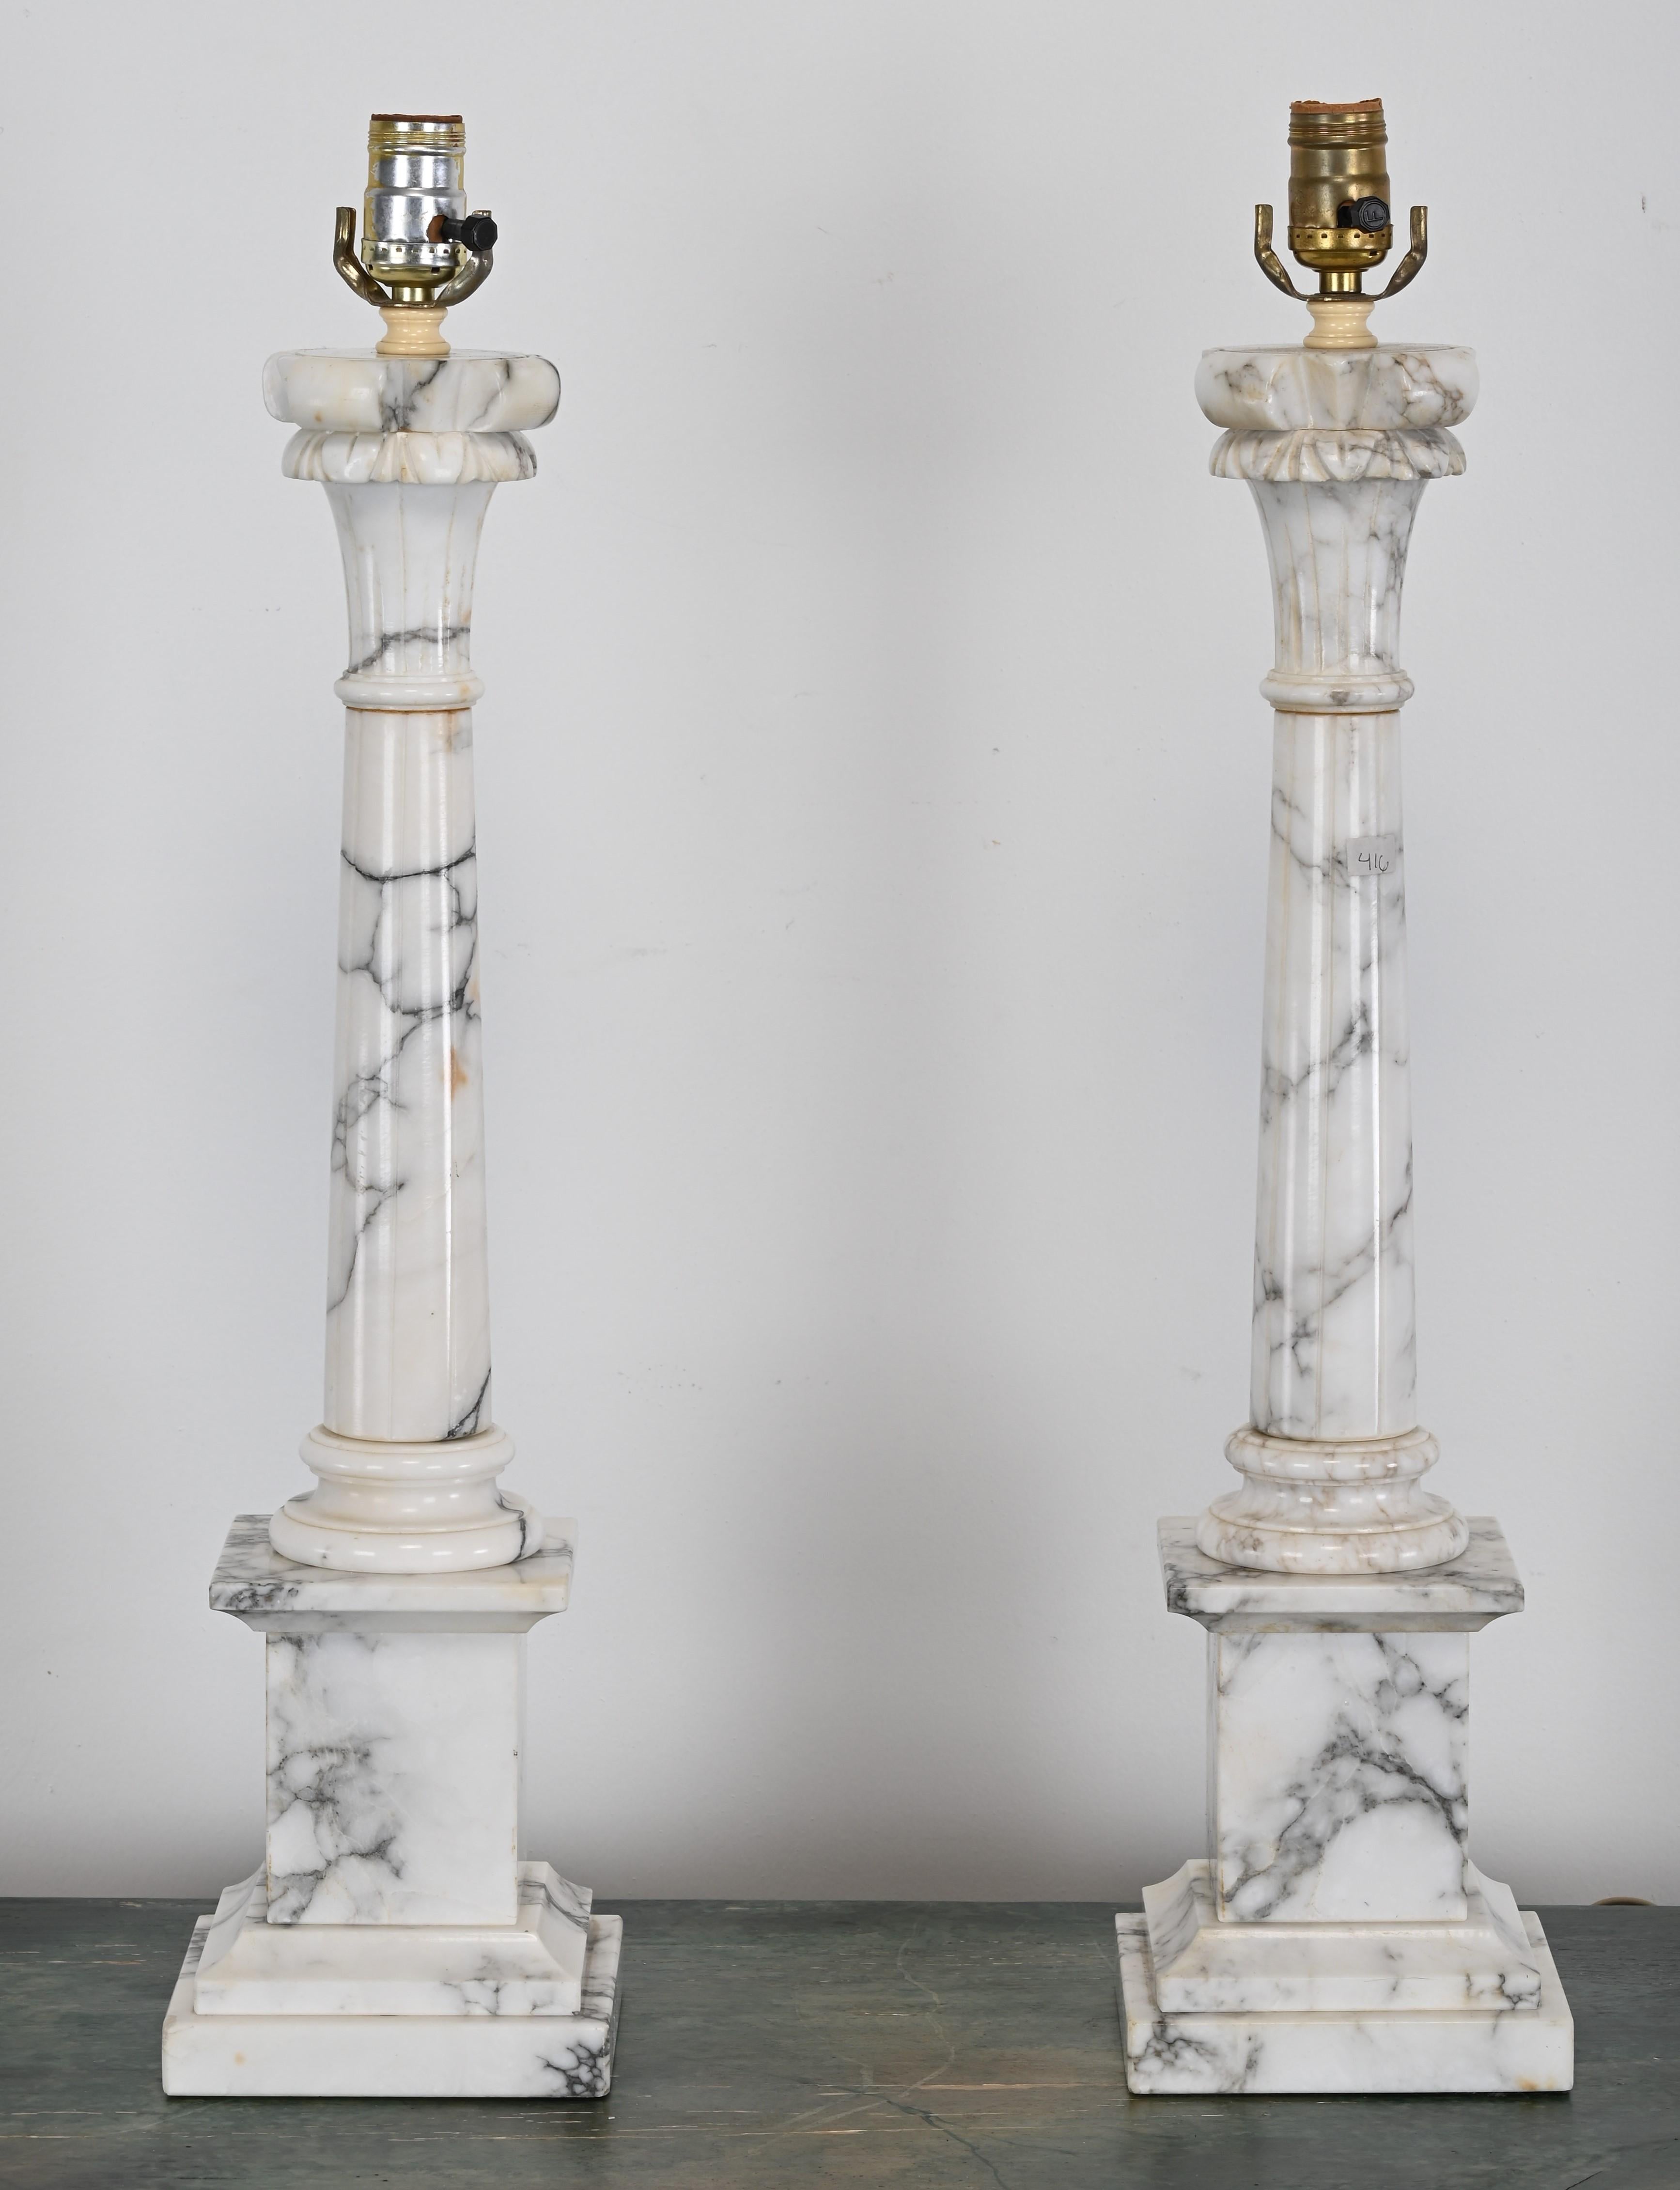 A neoclassical pair of Alabaster lamps in the manner of Corinthian Column. This pair would look great in any antique or classical interior. The electrical wire has not been checked but new wiring is recommended. There is one chip but not easy to see